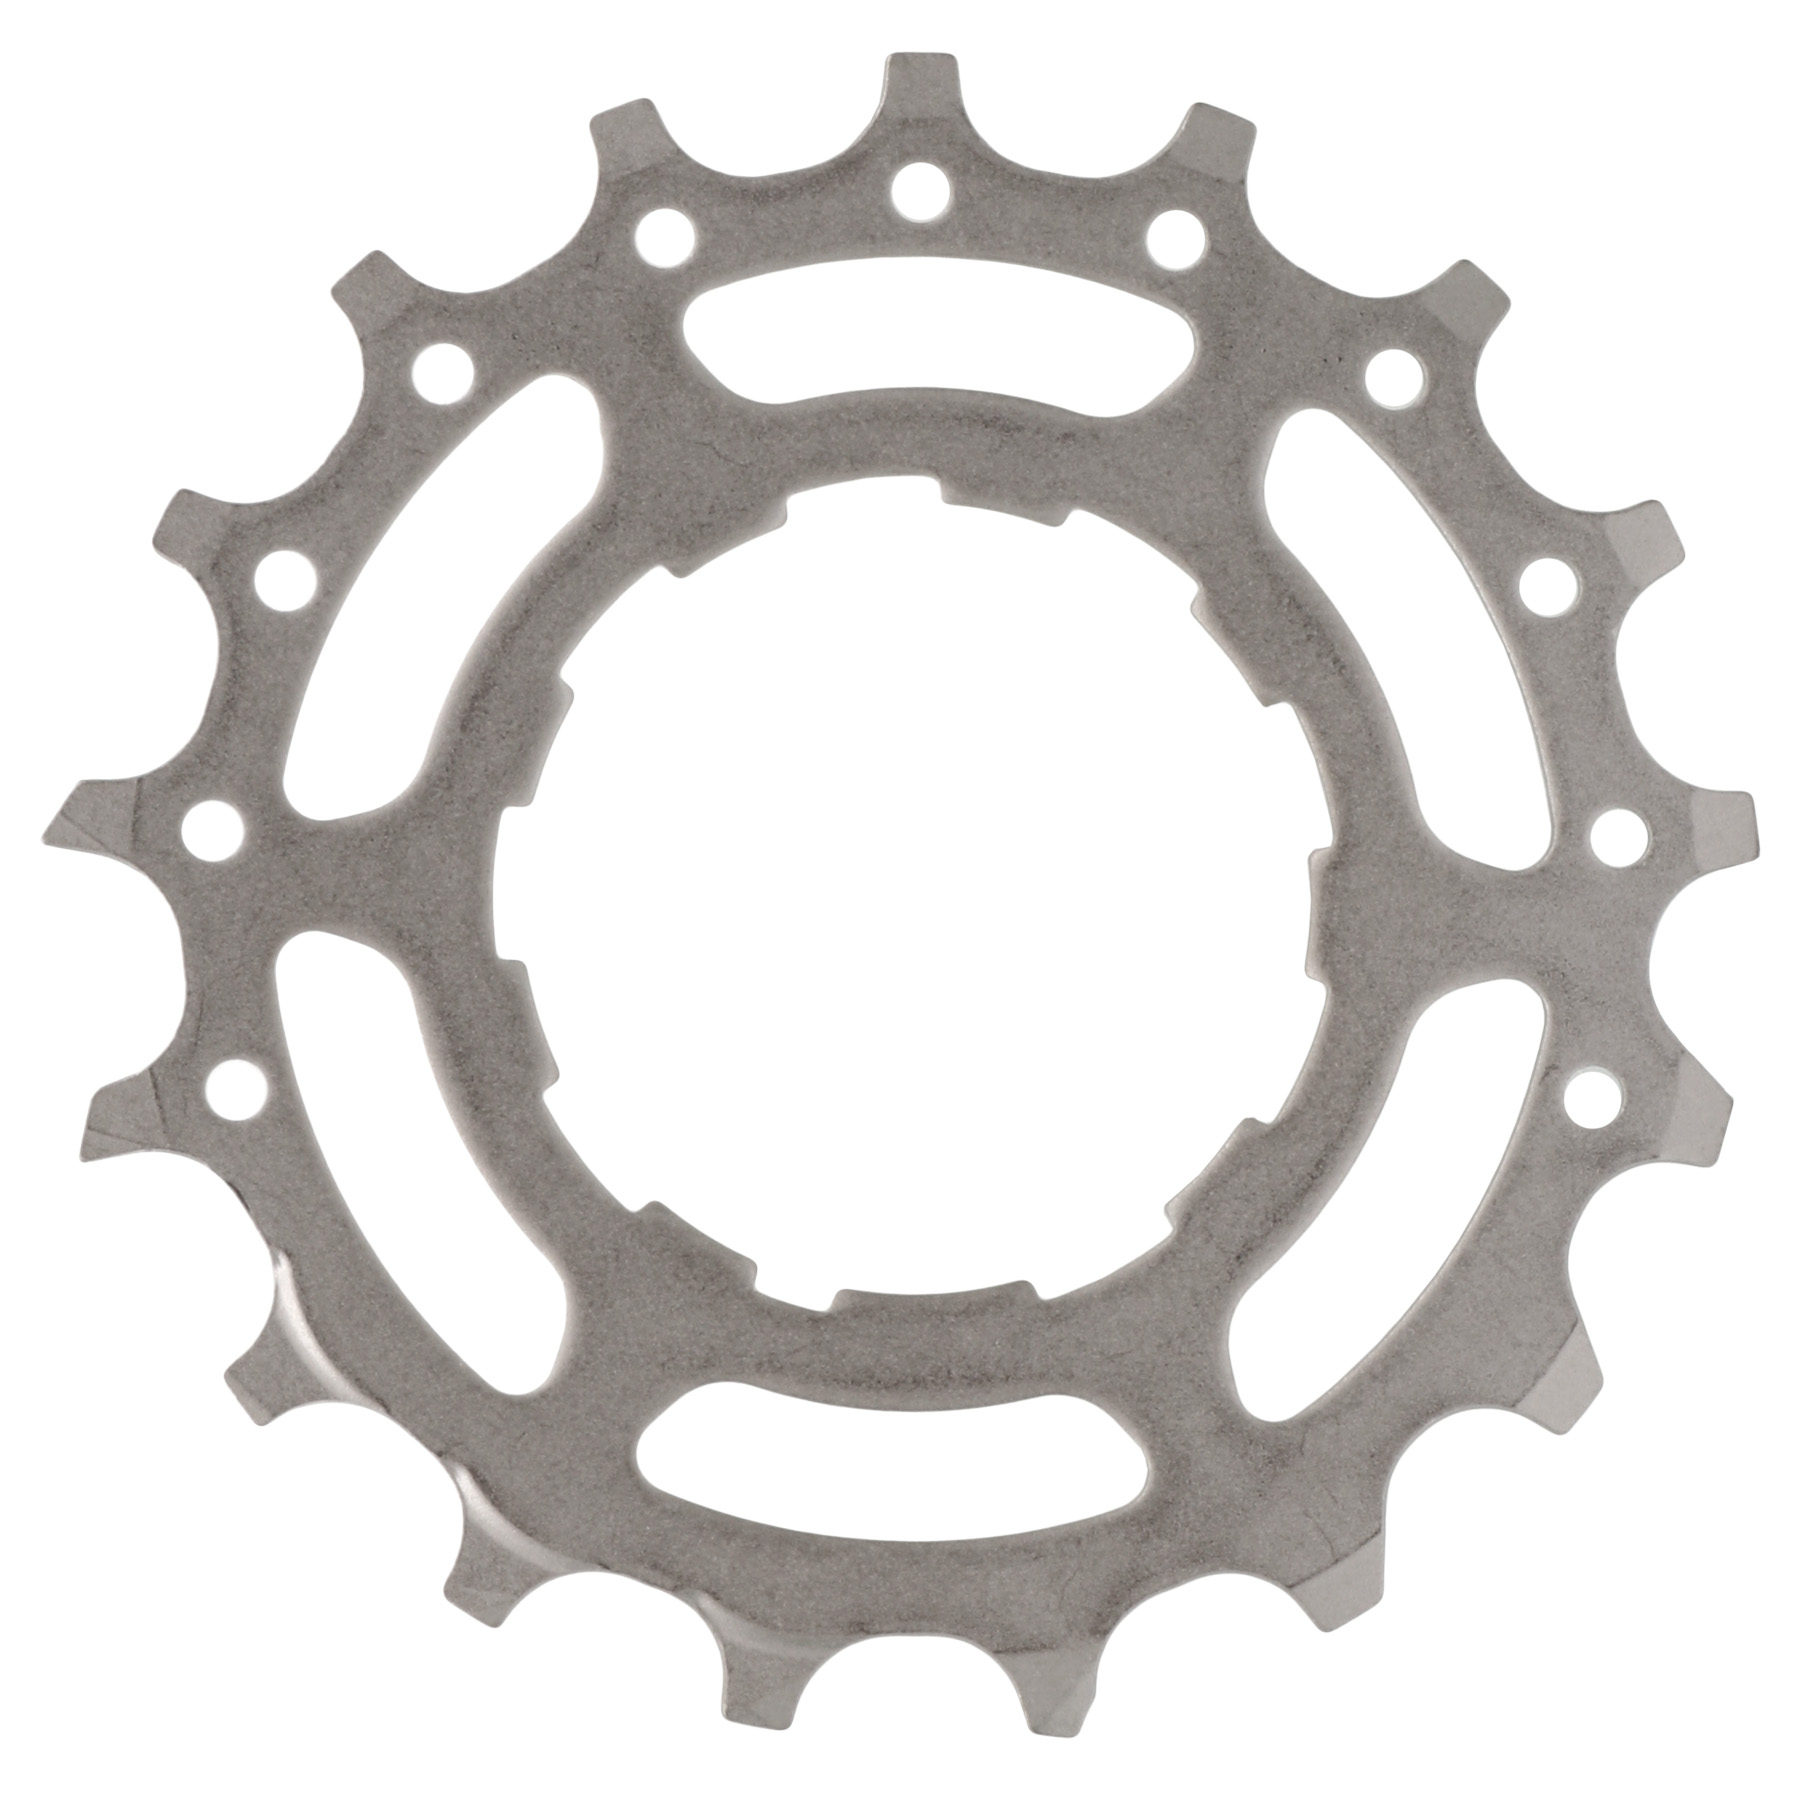 Image of Shimano Sprocket for Dura Ace 11-Speed Cassette - 17 T for 12-25/28 (Y1YC17200) - CS-R9100 / CS-9000